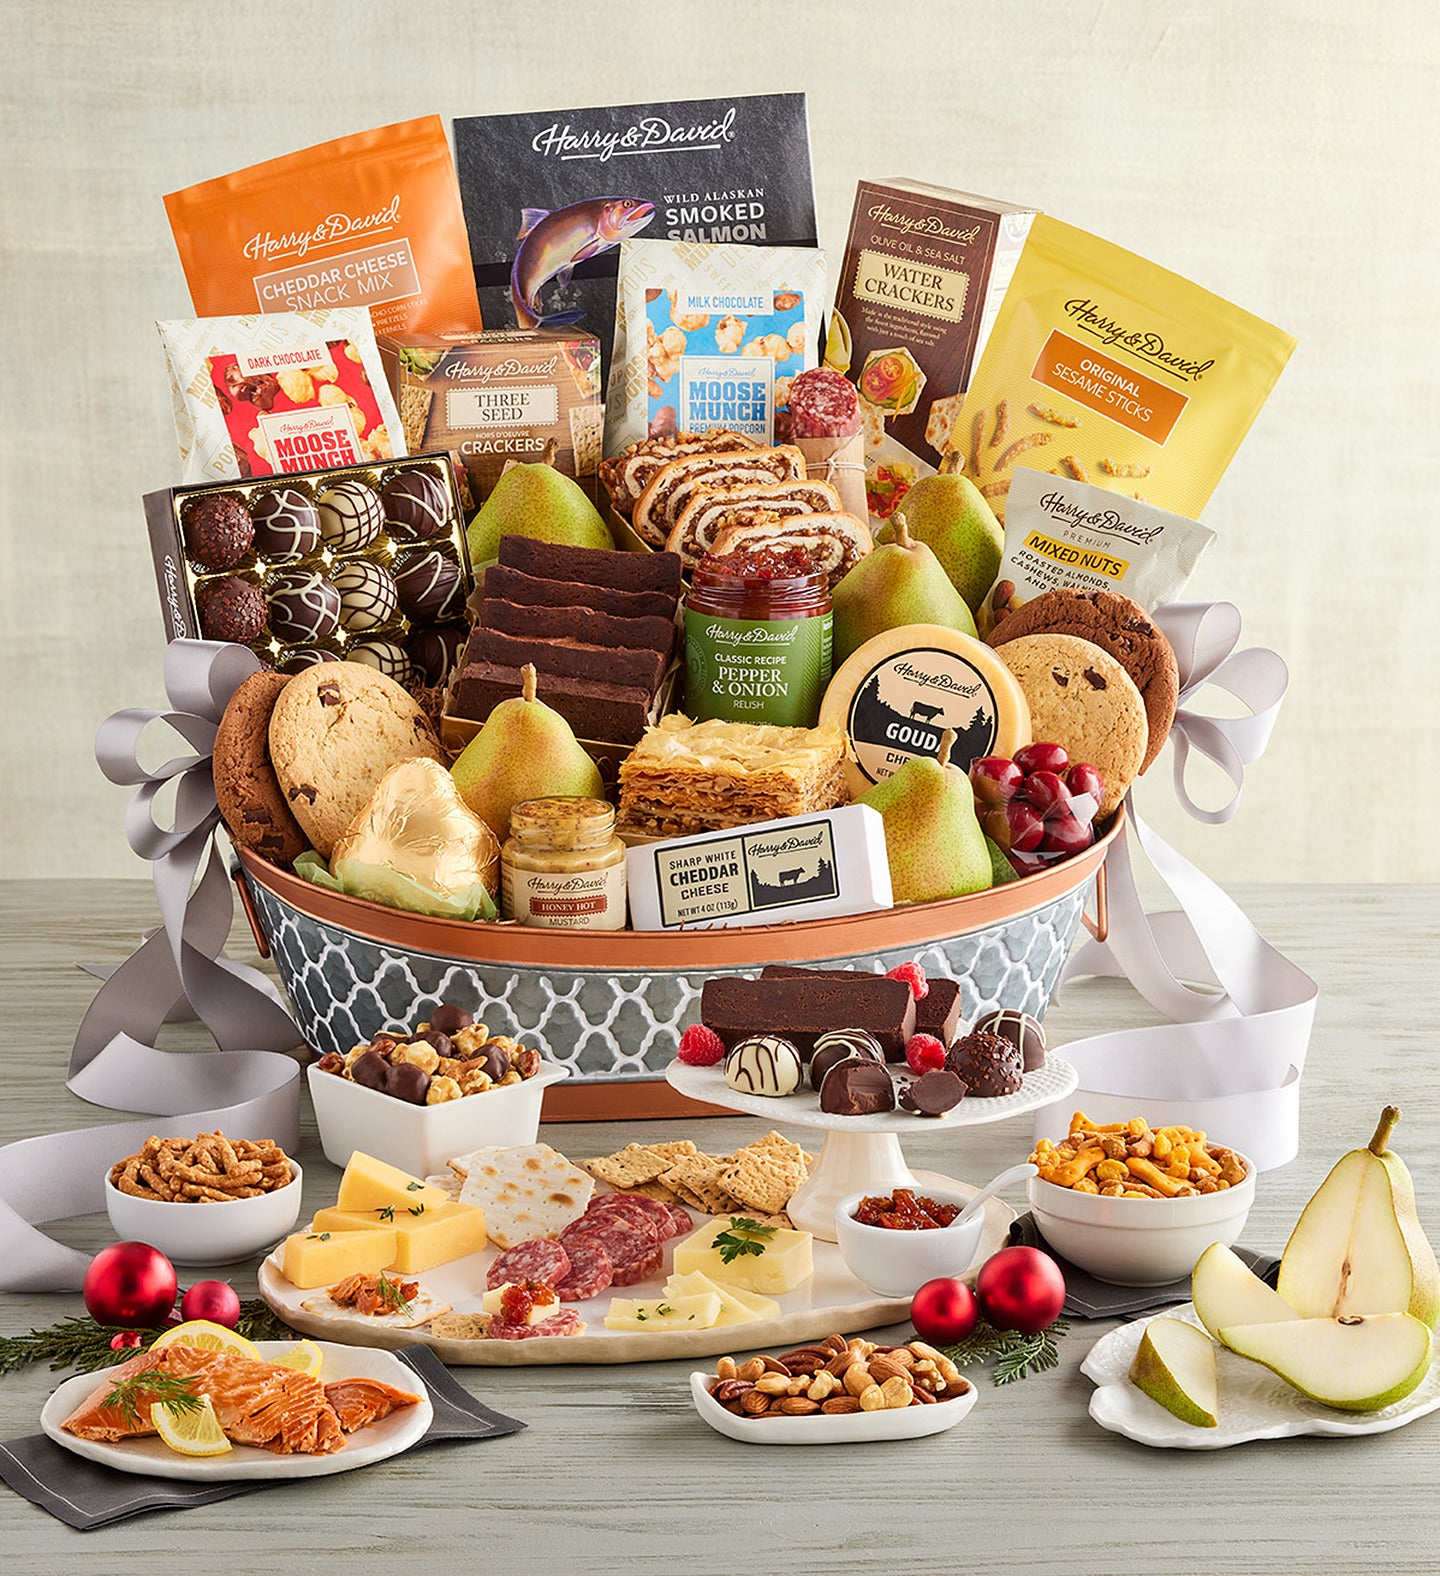 Personalized Gift Baskets or Boxes | Gourmet Food Gifts | Bauman Farms